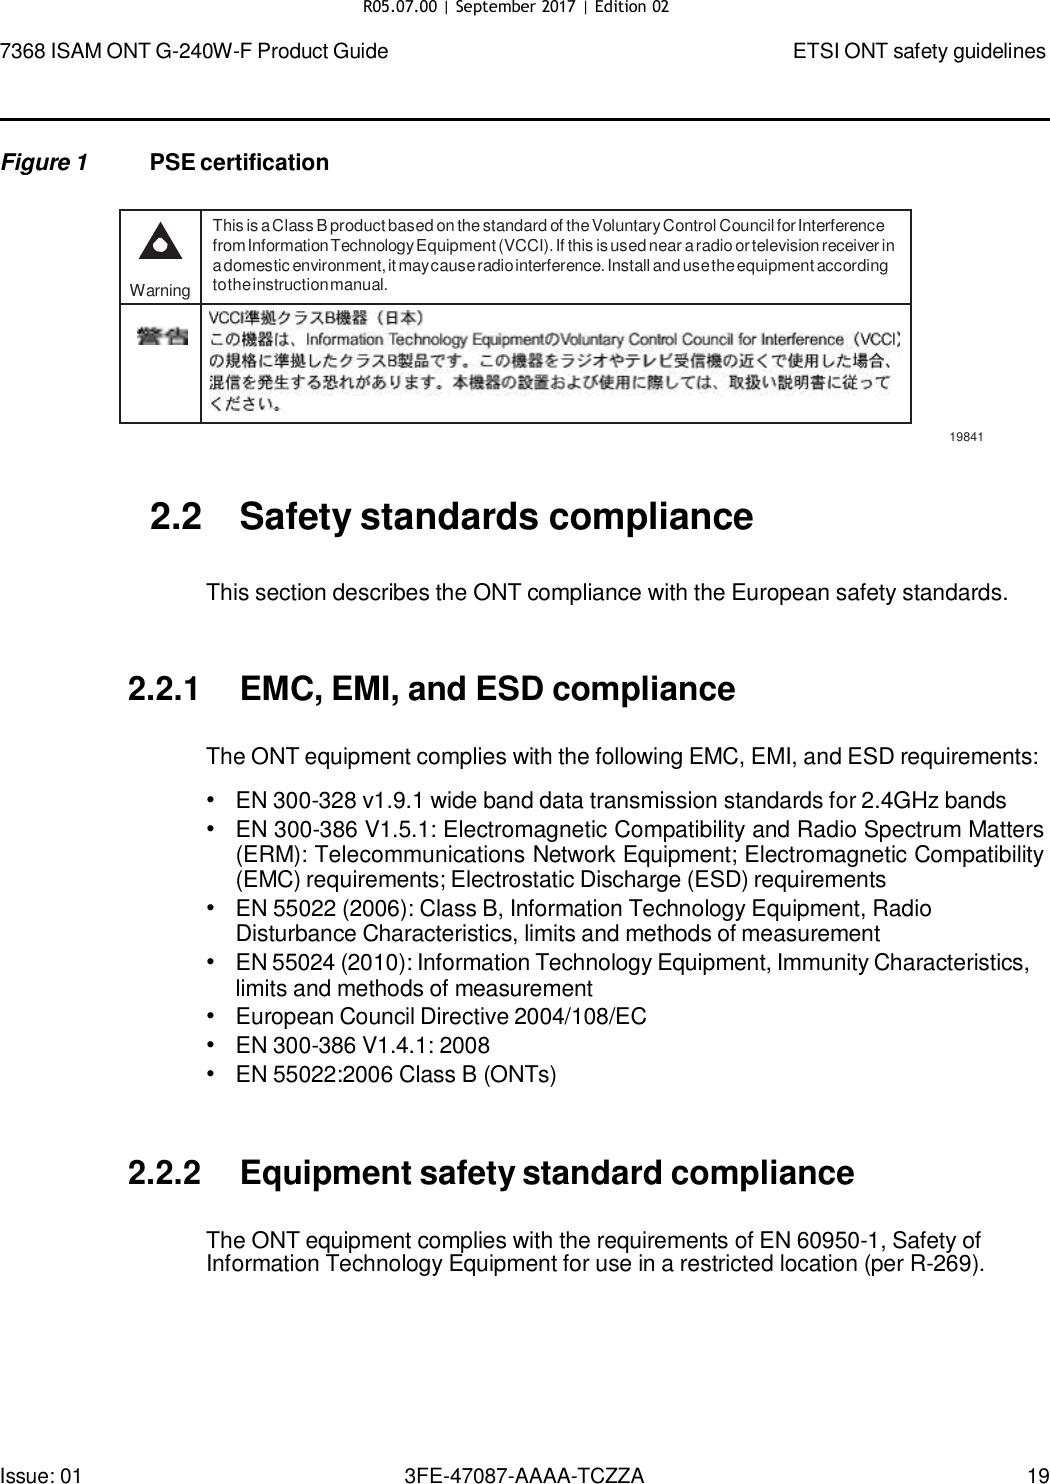 Page 17 of Nokia Bell G240WFV2 7368 ISAM GPON ONU User Manual 7368 ISAM ONT G 240W F Product Guide